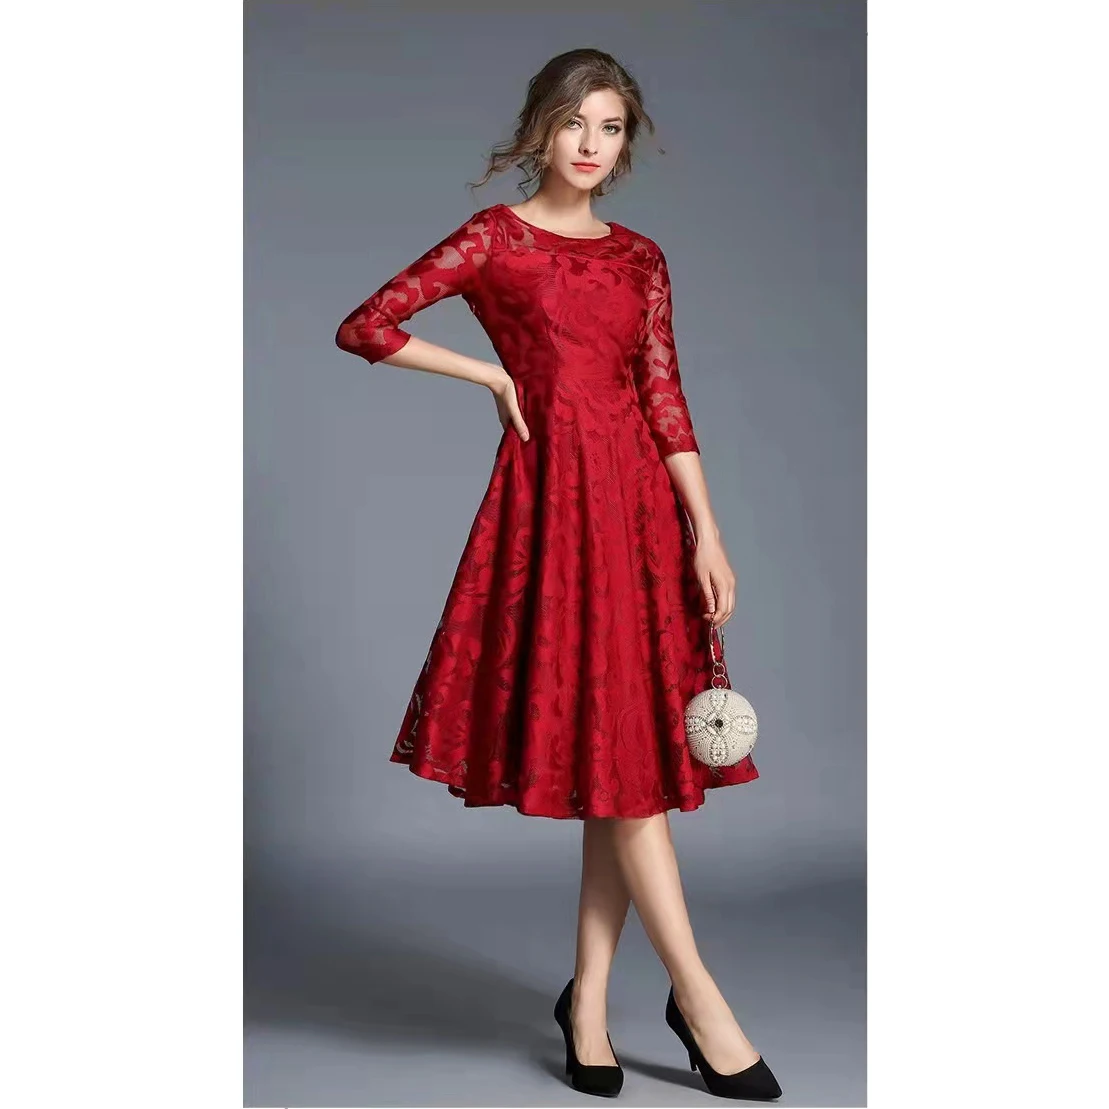 

Women's Sexy Mid Sleeve Stitching Perspective Casual Vintage Lace Dress Drop Shipping, Picture shown